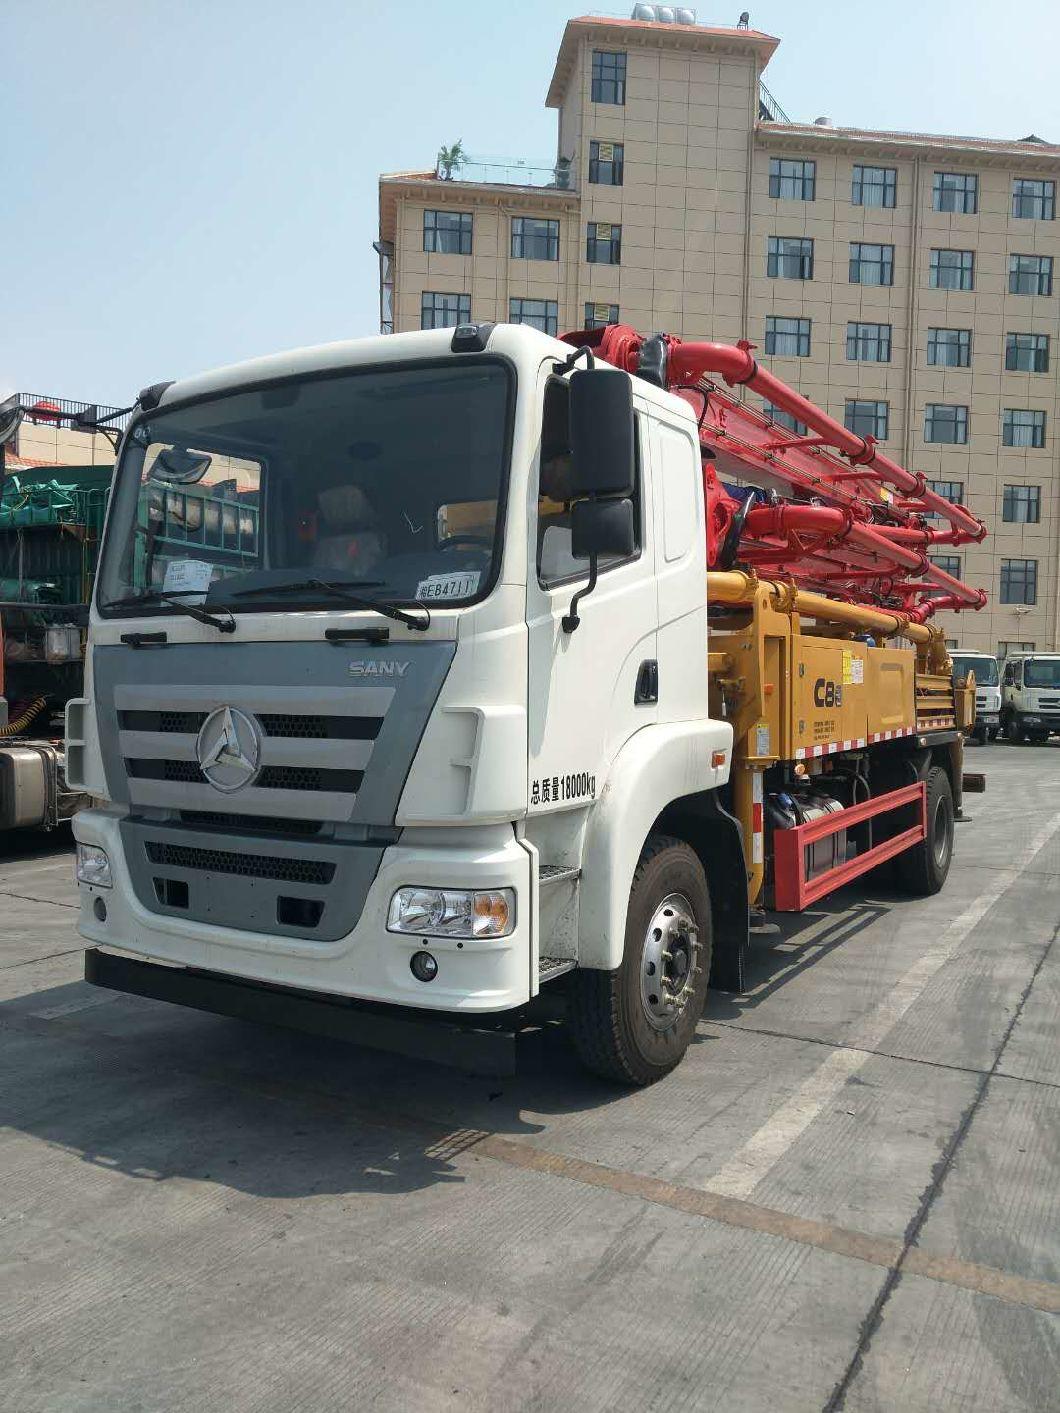 Syg5360thb 43m Boom Pressure Concrete Pump with Mercedes-Benz Chassis